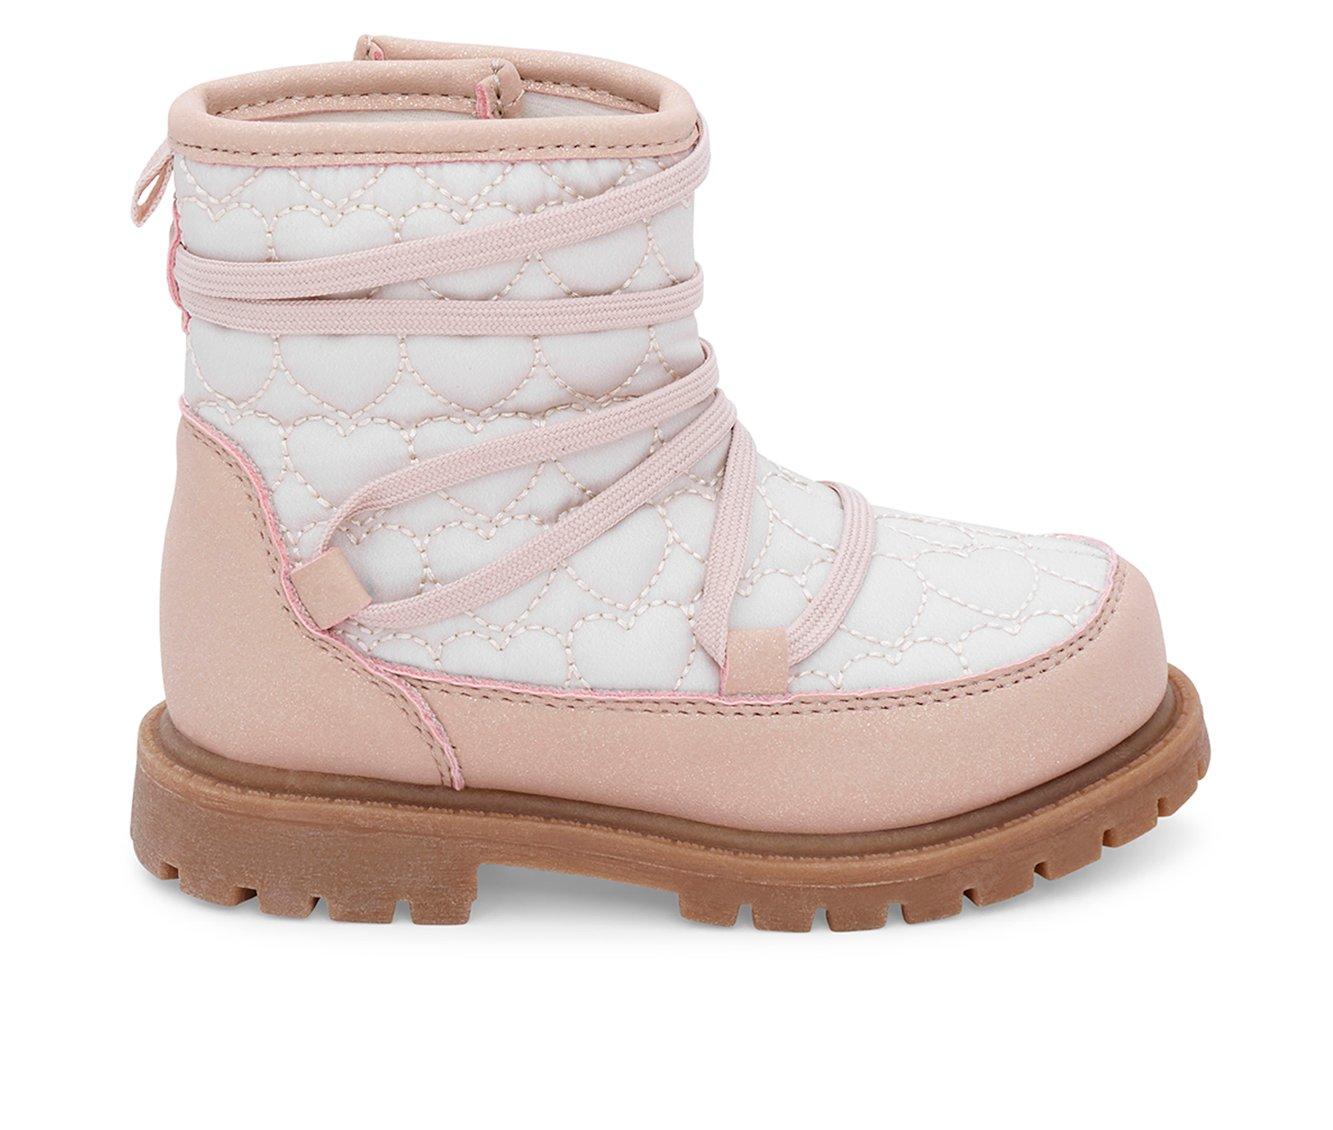 Girls' Carters Toddler & Little Kid Tayla Boots